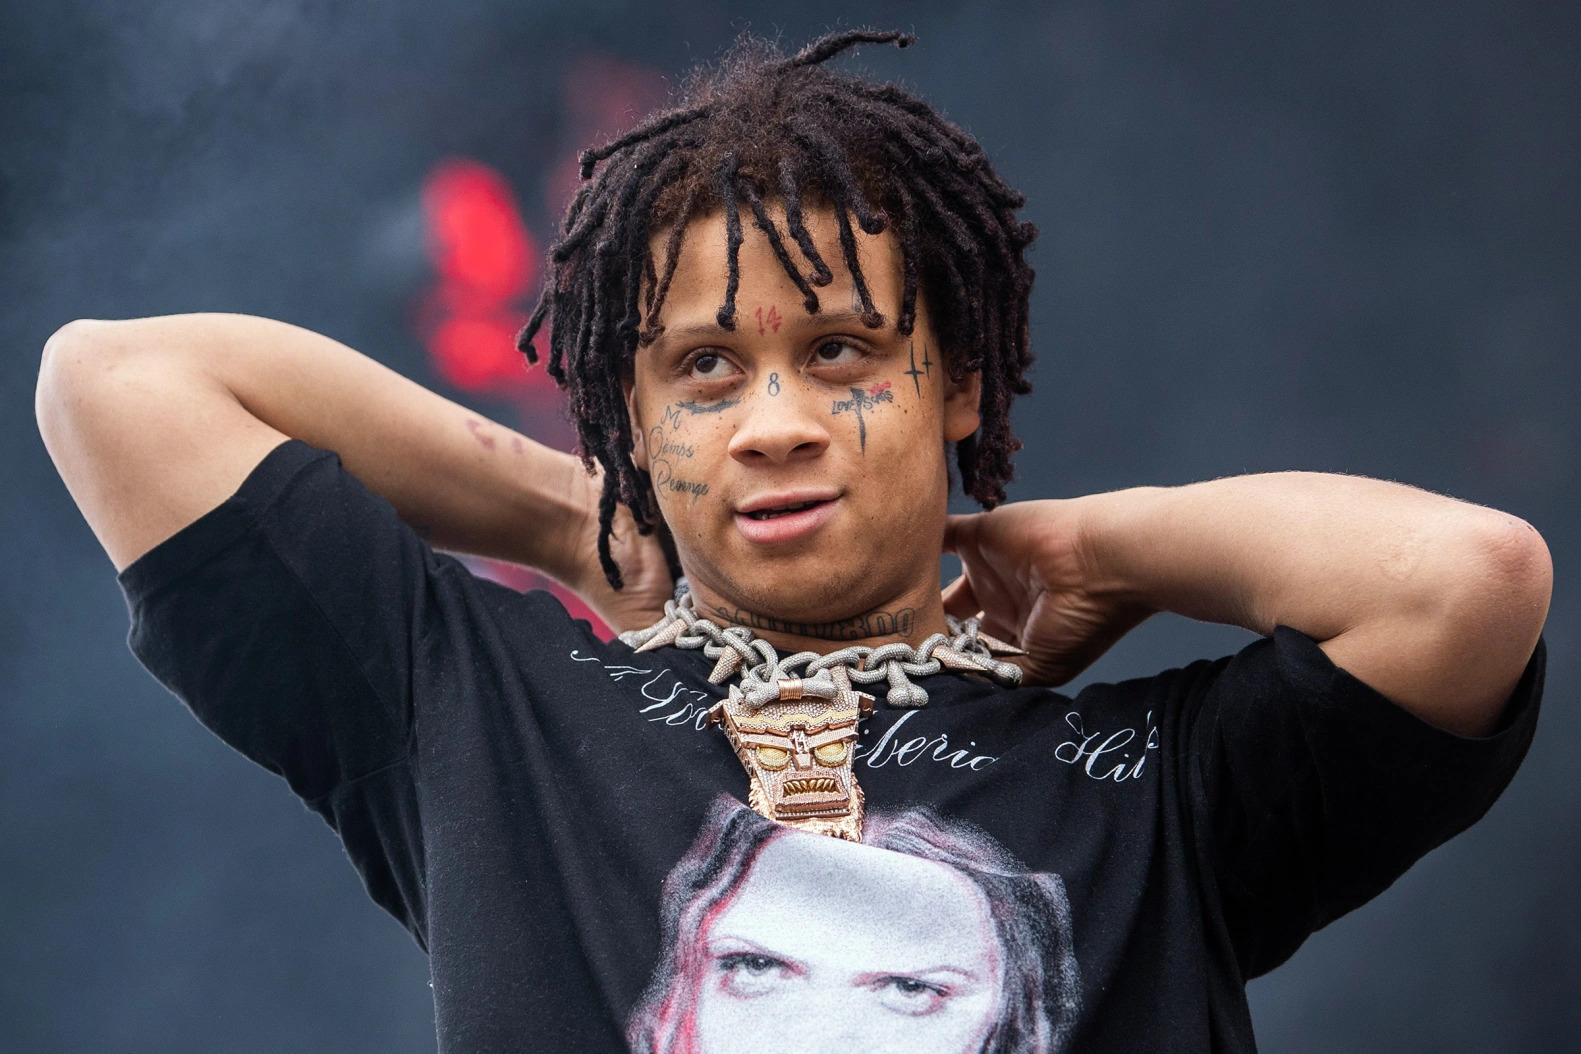 Fans Of Trippie Redd Cry "Refund" At Cut-Off Concert He Showed Up Late To